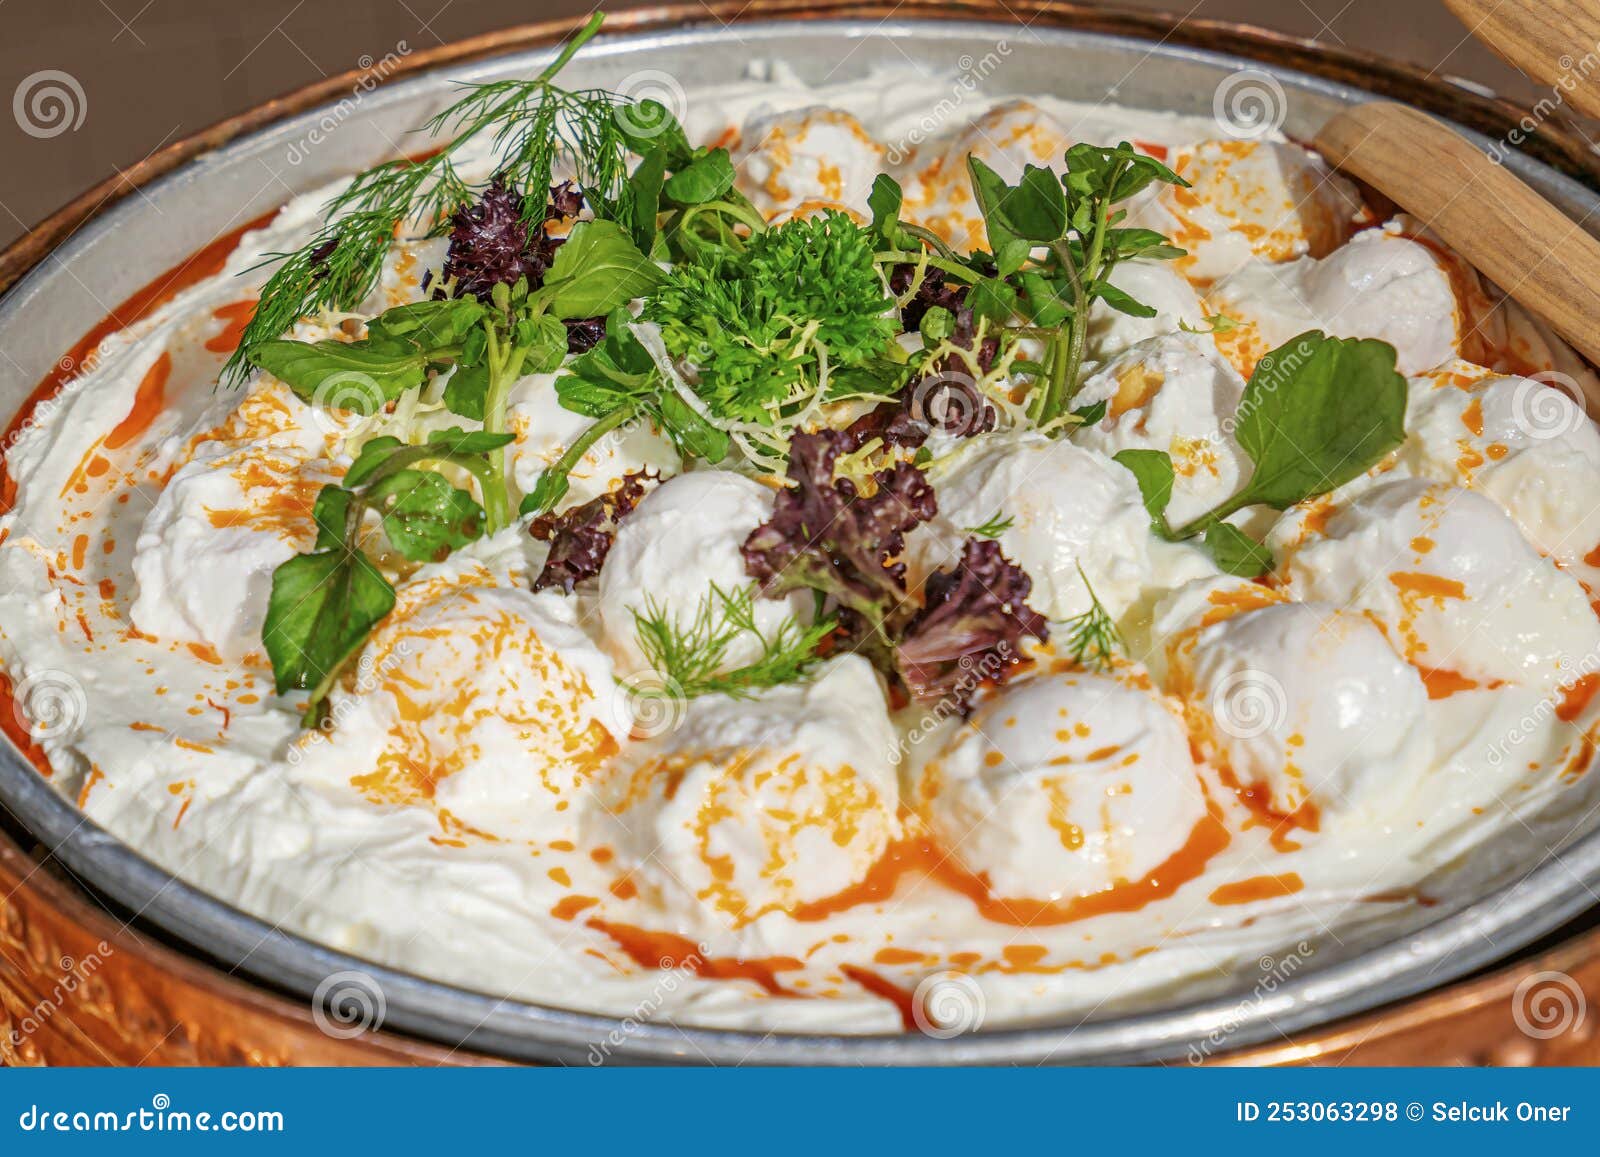 delicious specail poached eggs with yoghurt Ãâ¡ÃÂ±lbÃÂ±r